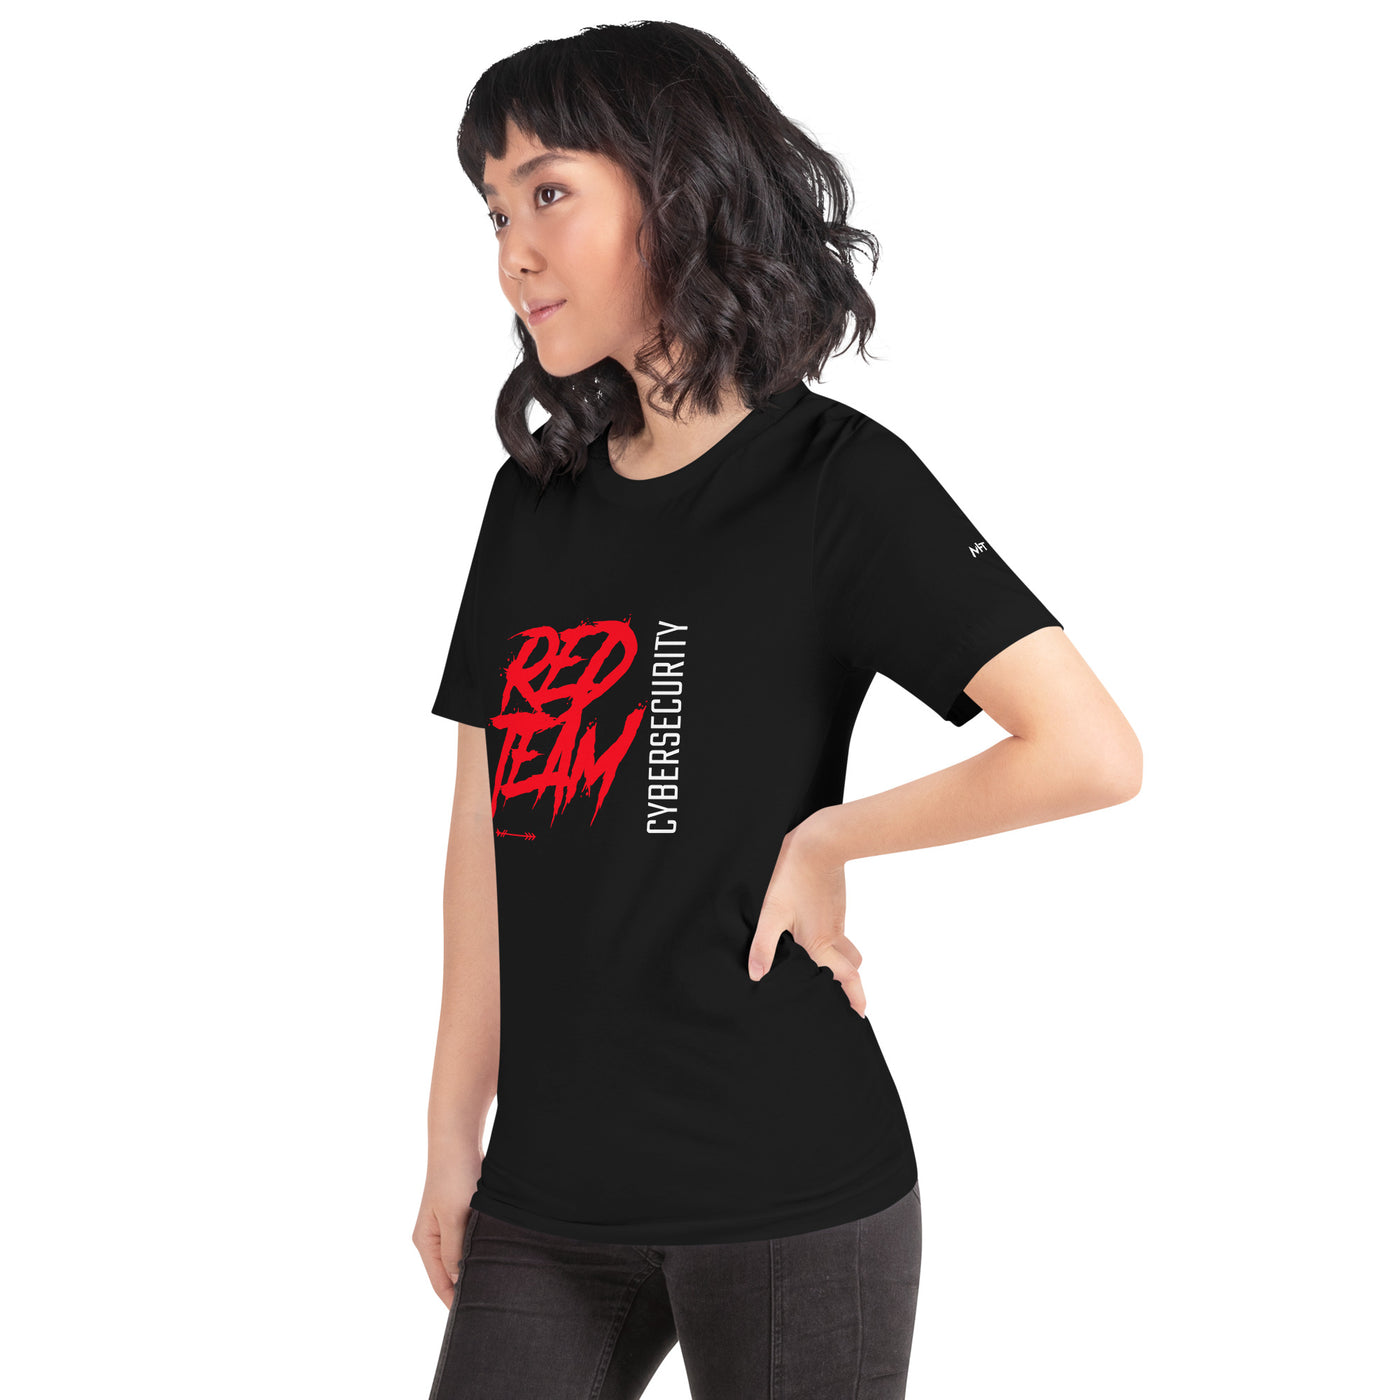 Cyber Security Red Team V6 - Unisex t-shirt